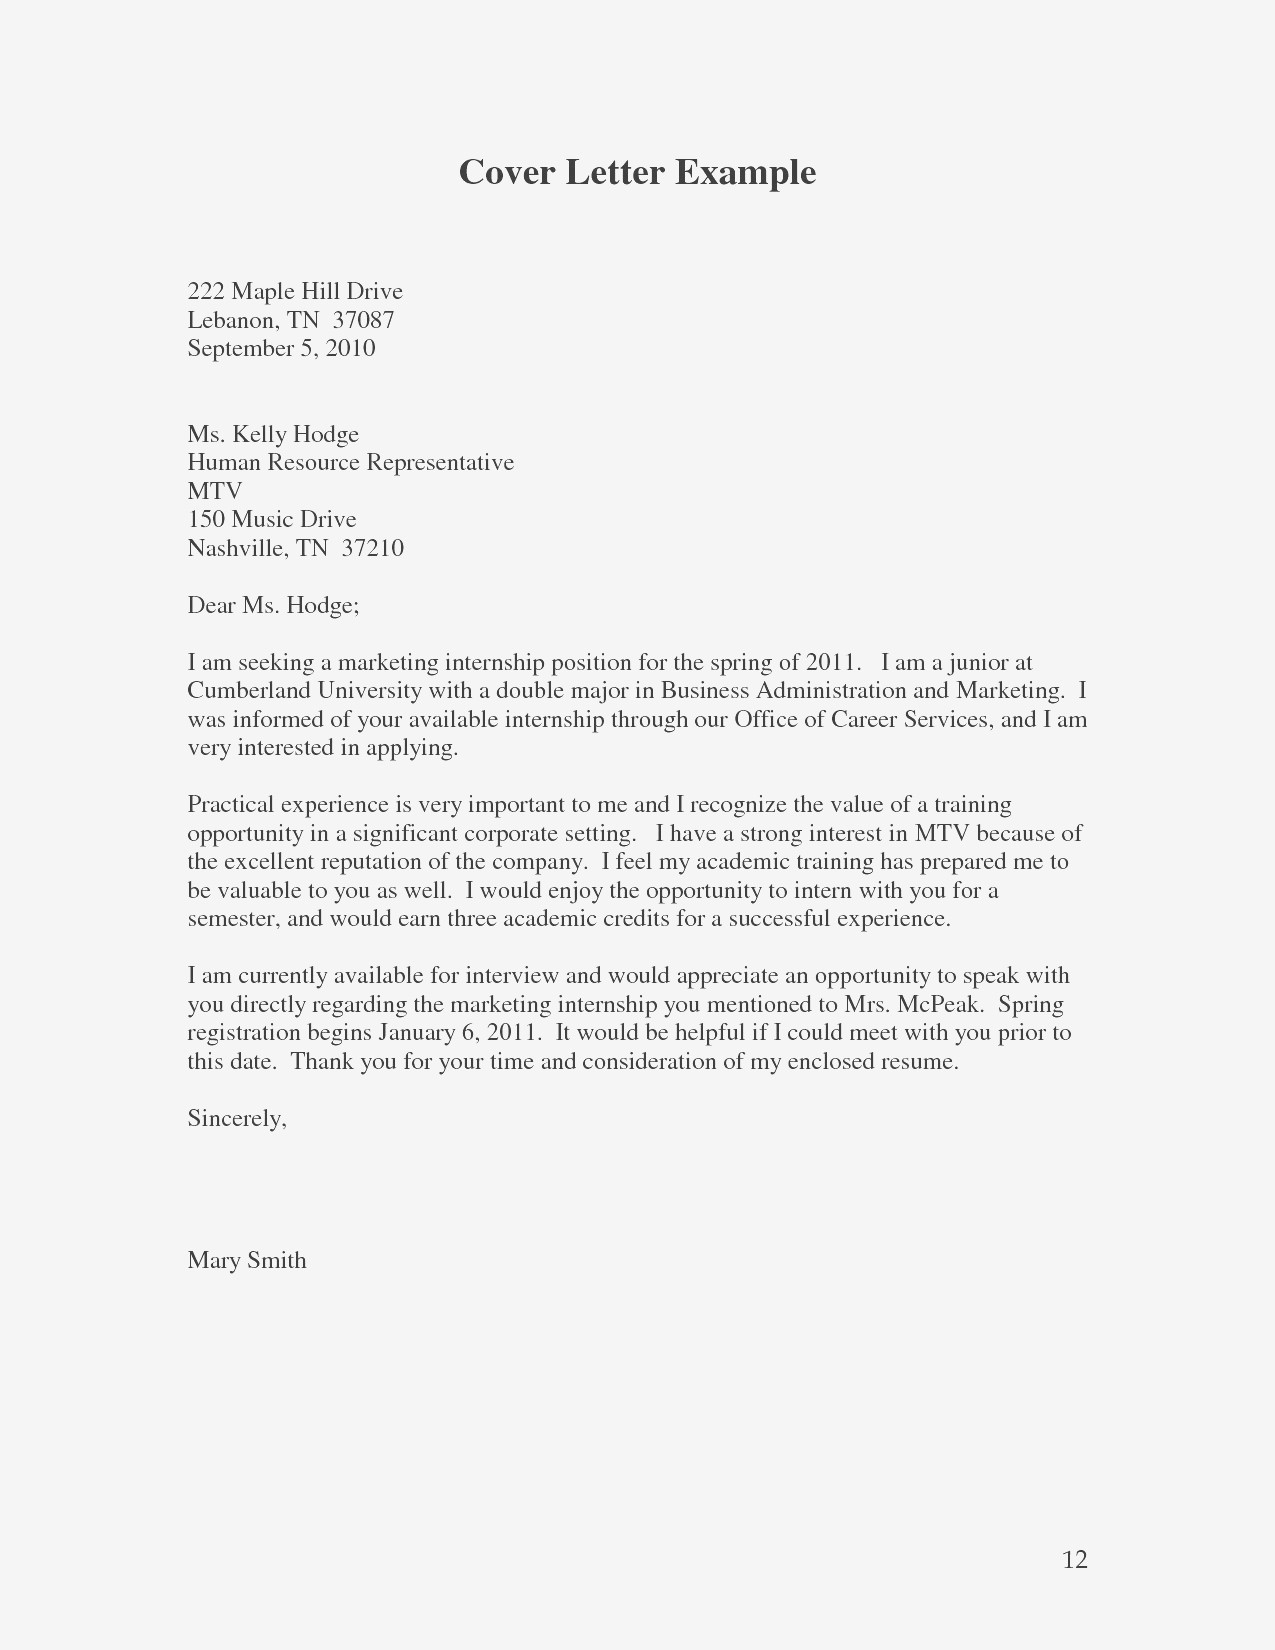 Example Cover Letter What Should Be On A Cover Letter Beautiful Example Cover Letters For